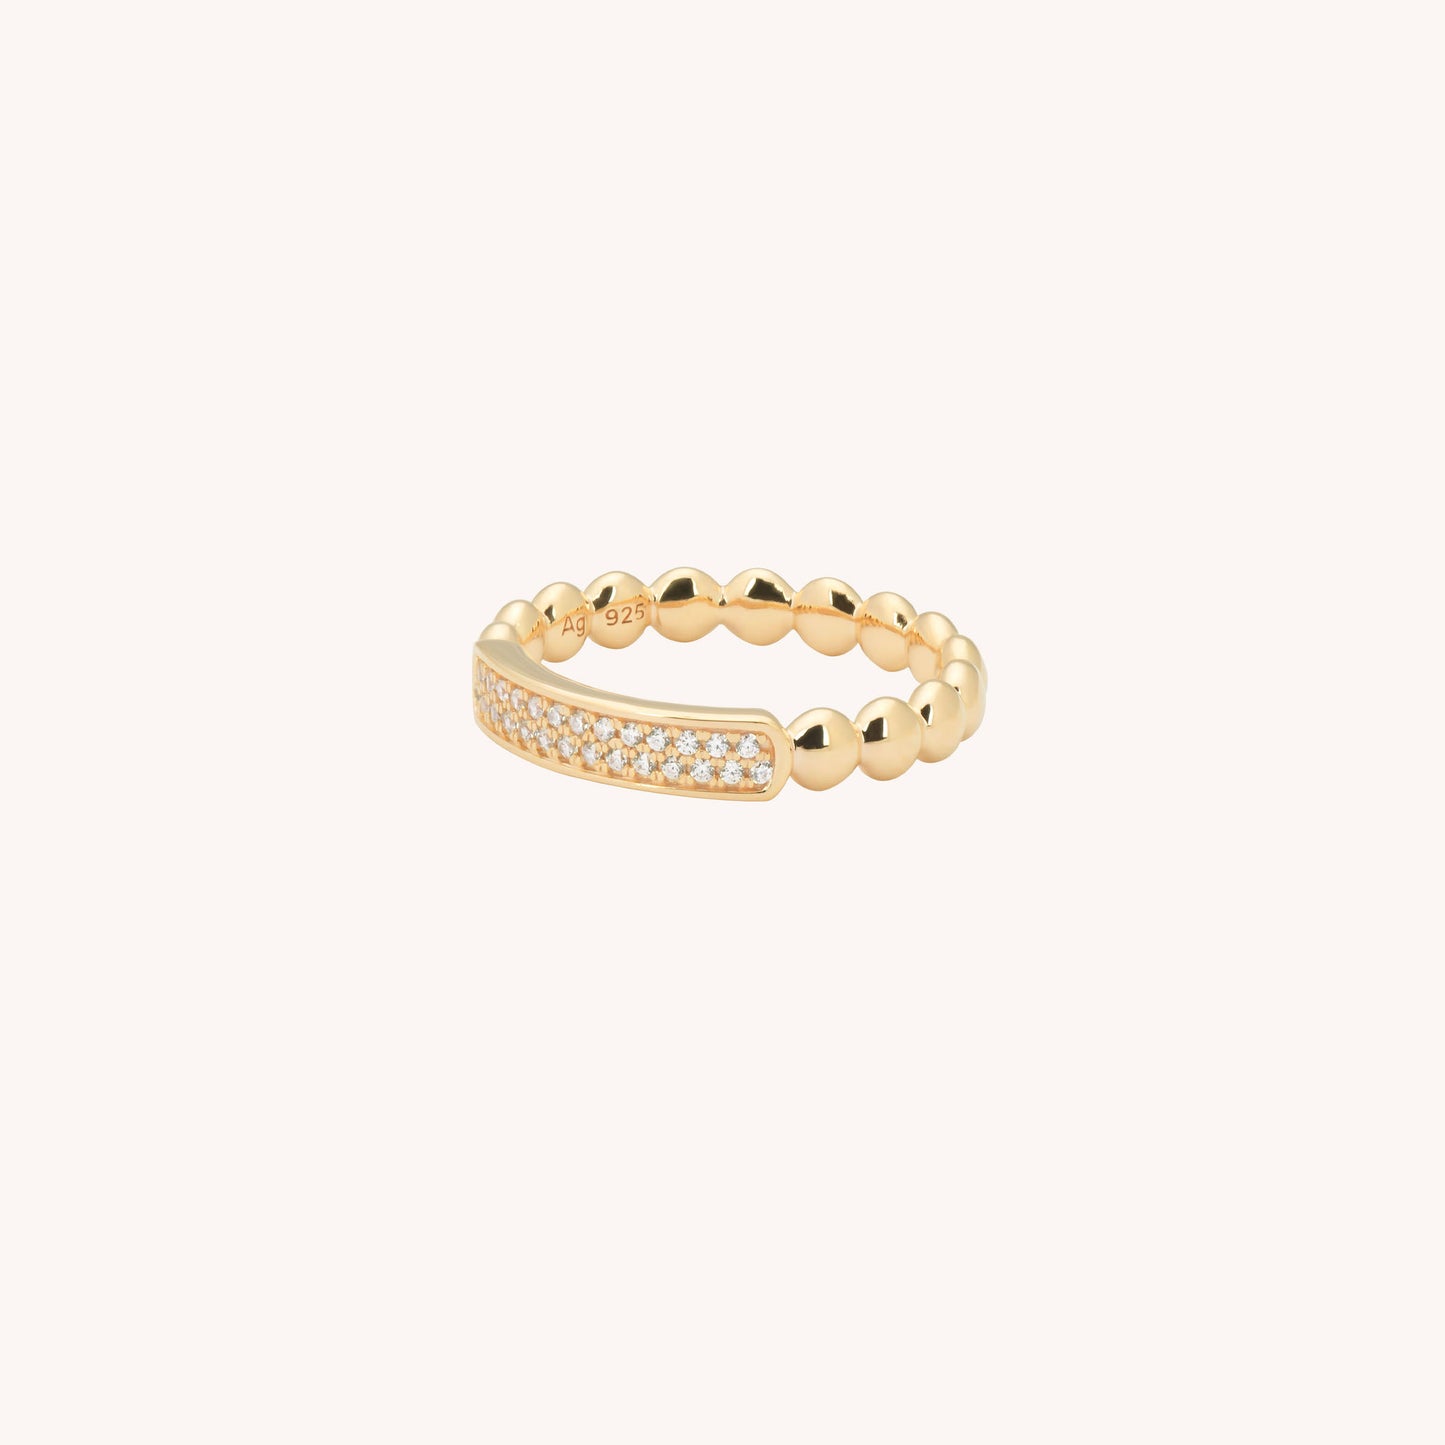 Lily ring - gold plated